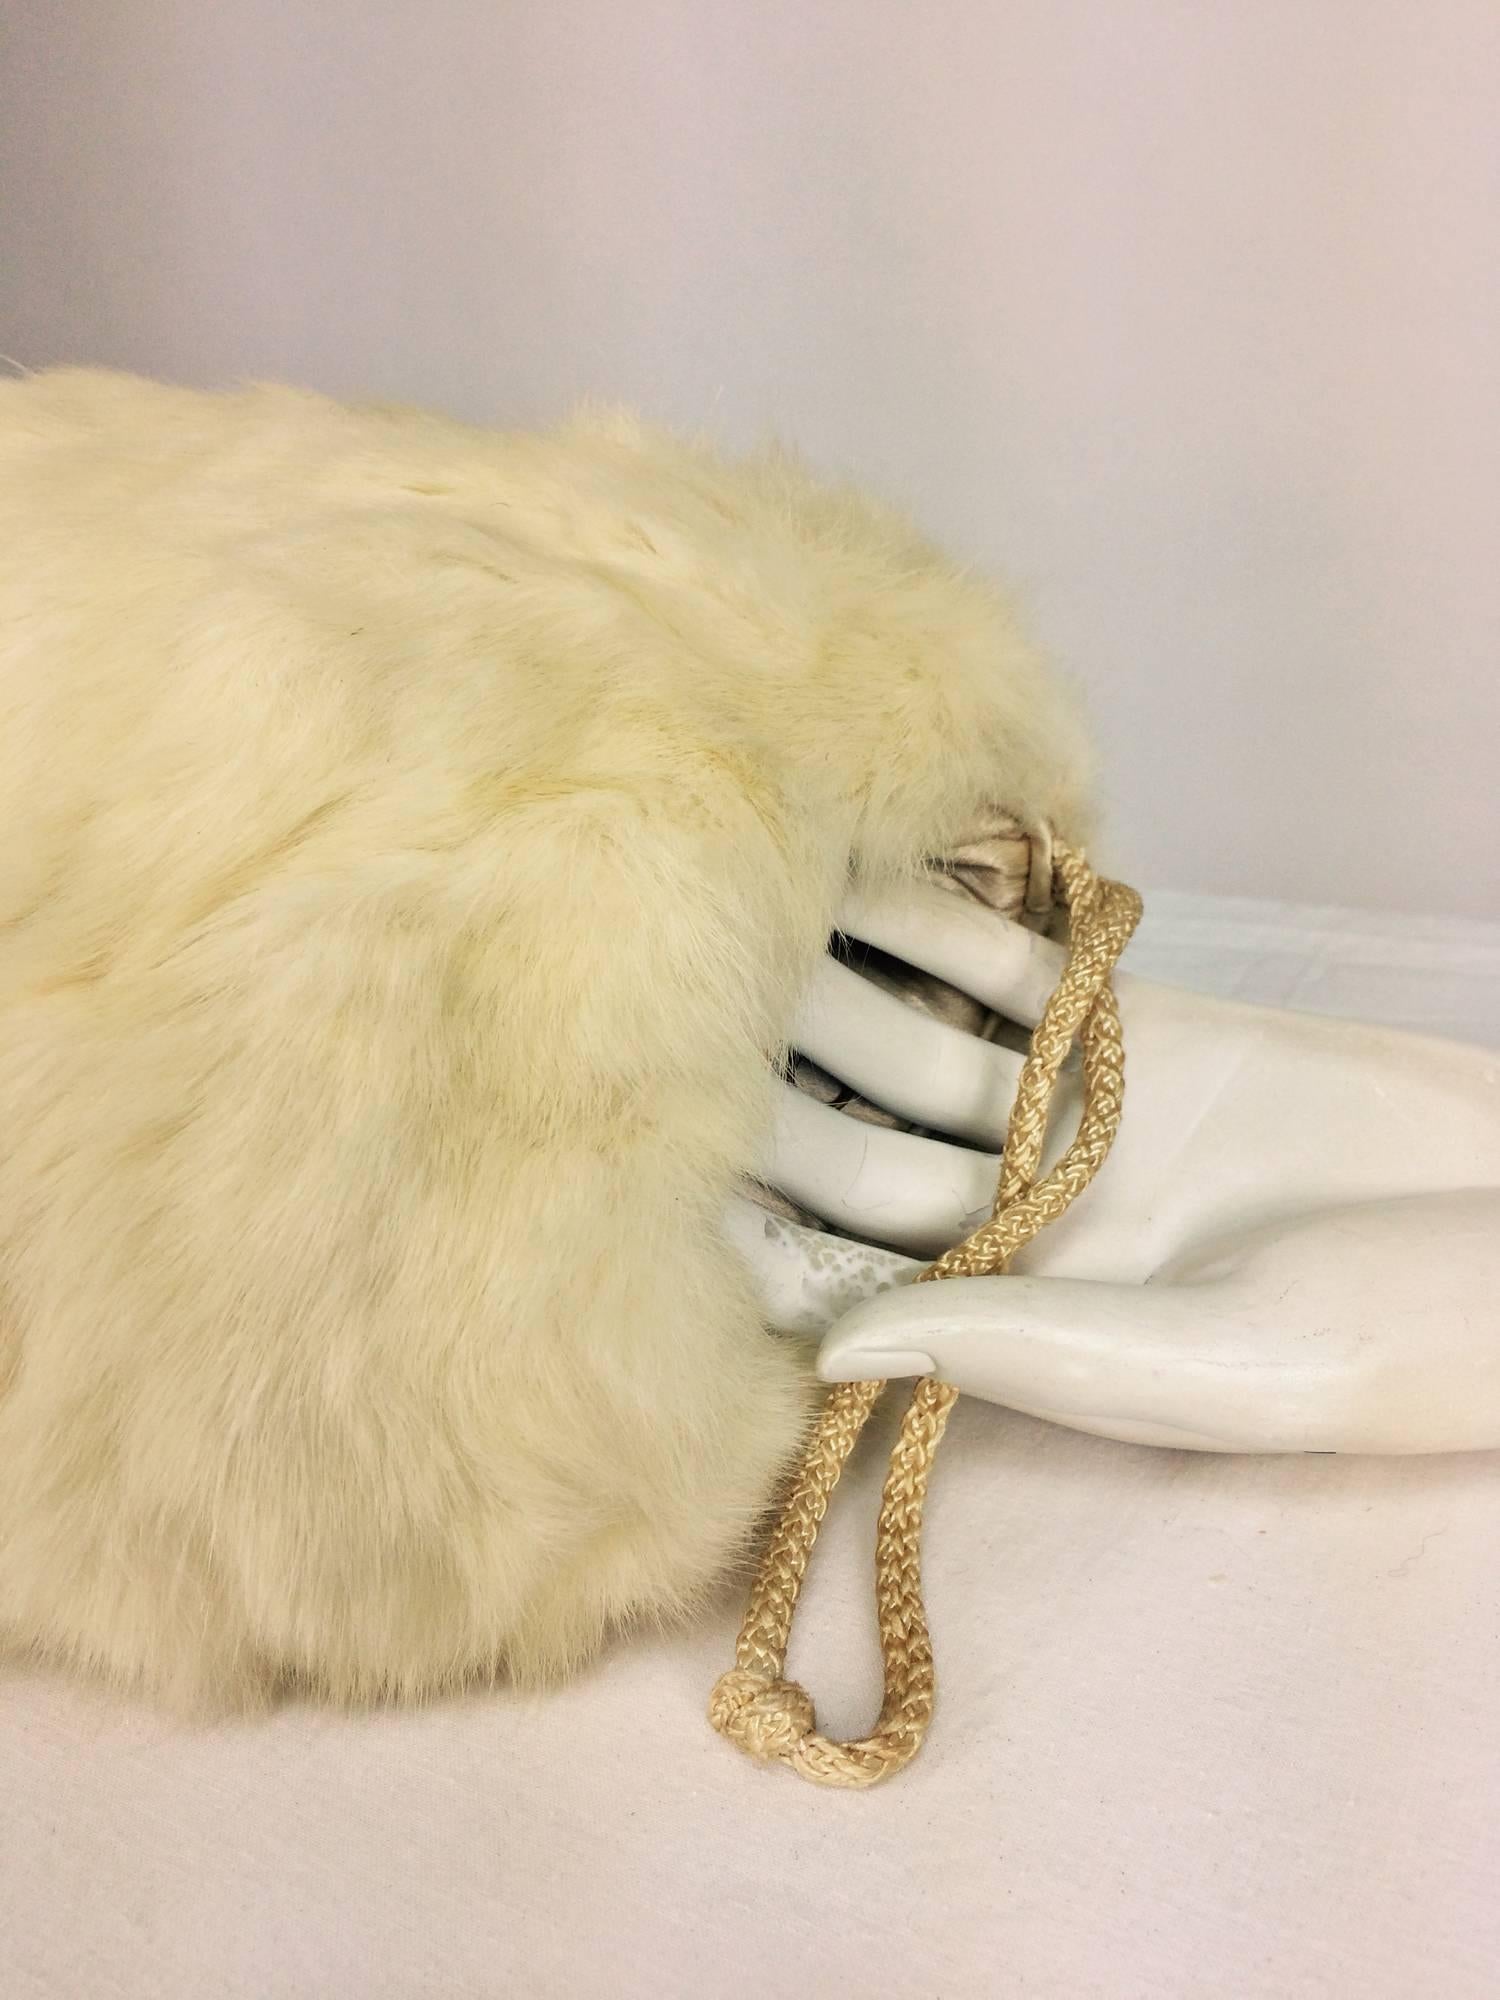 Ermine fur and down insulated muff hand warmer 1930s...Soft ermine fur round muff, open at each end and lined with silk, it is insulated with down to keep your hands nice and warm...There is a hidden zipper compartment inside to keep your